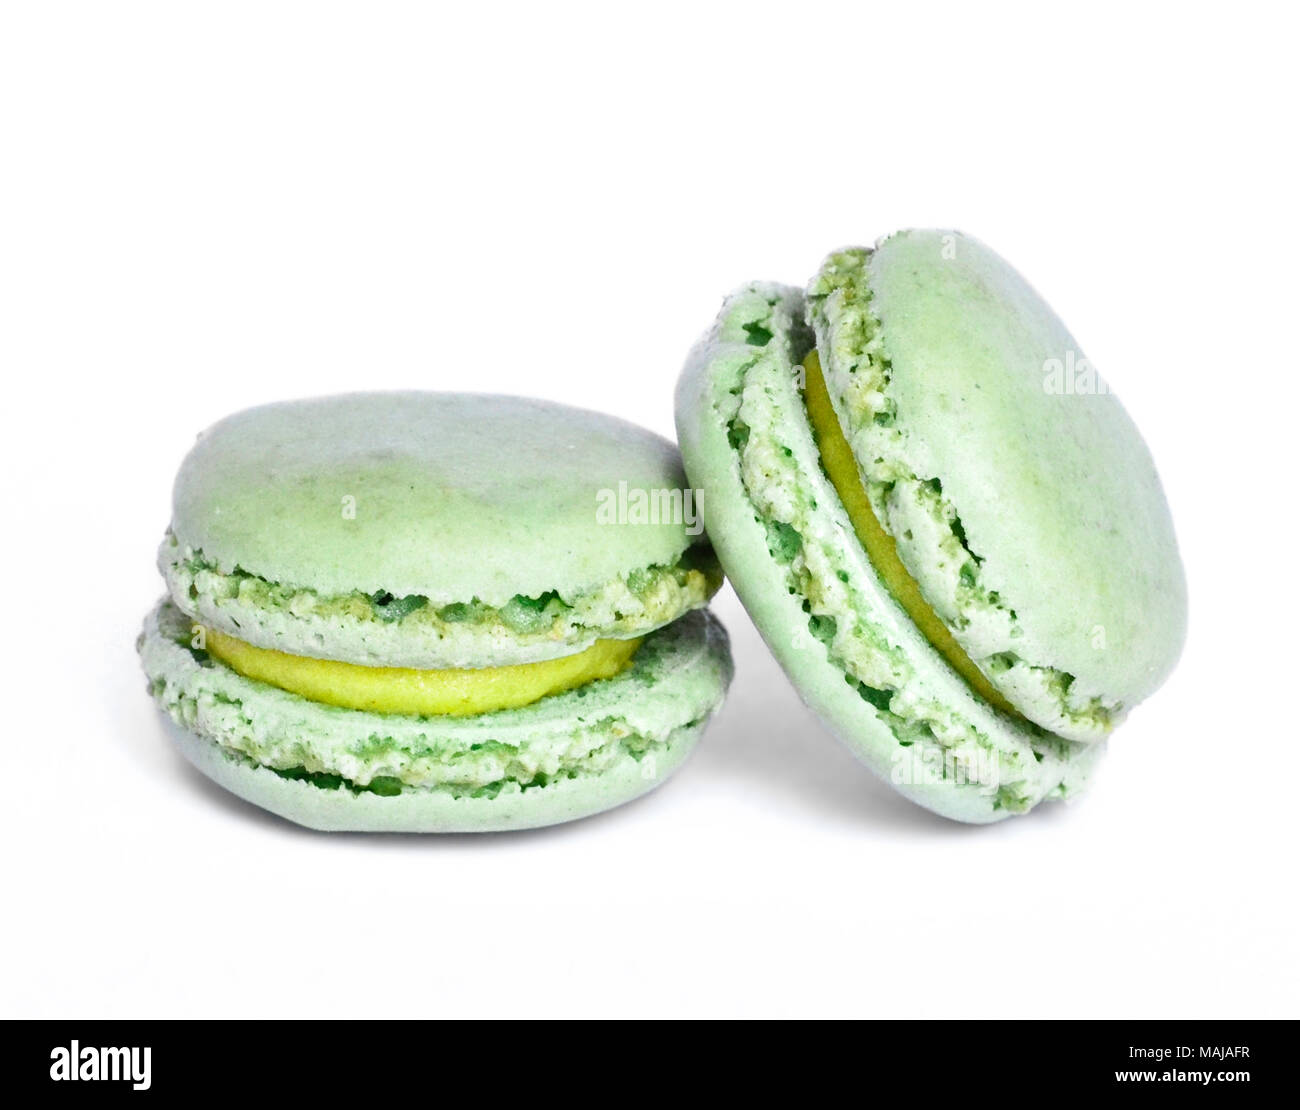 Fresh macrons or macaroon, french pastry. Colorful macaron, isolated on white background. Stock Photo